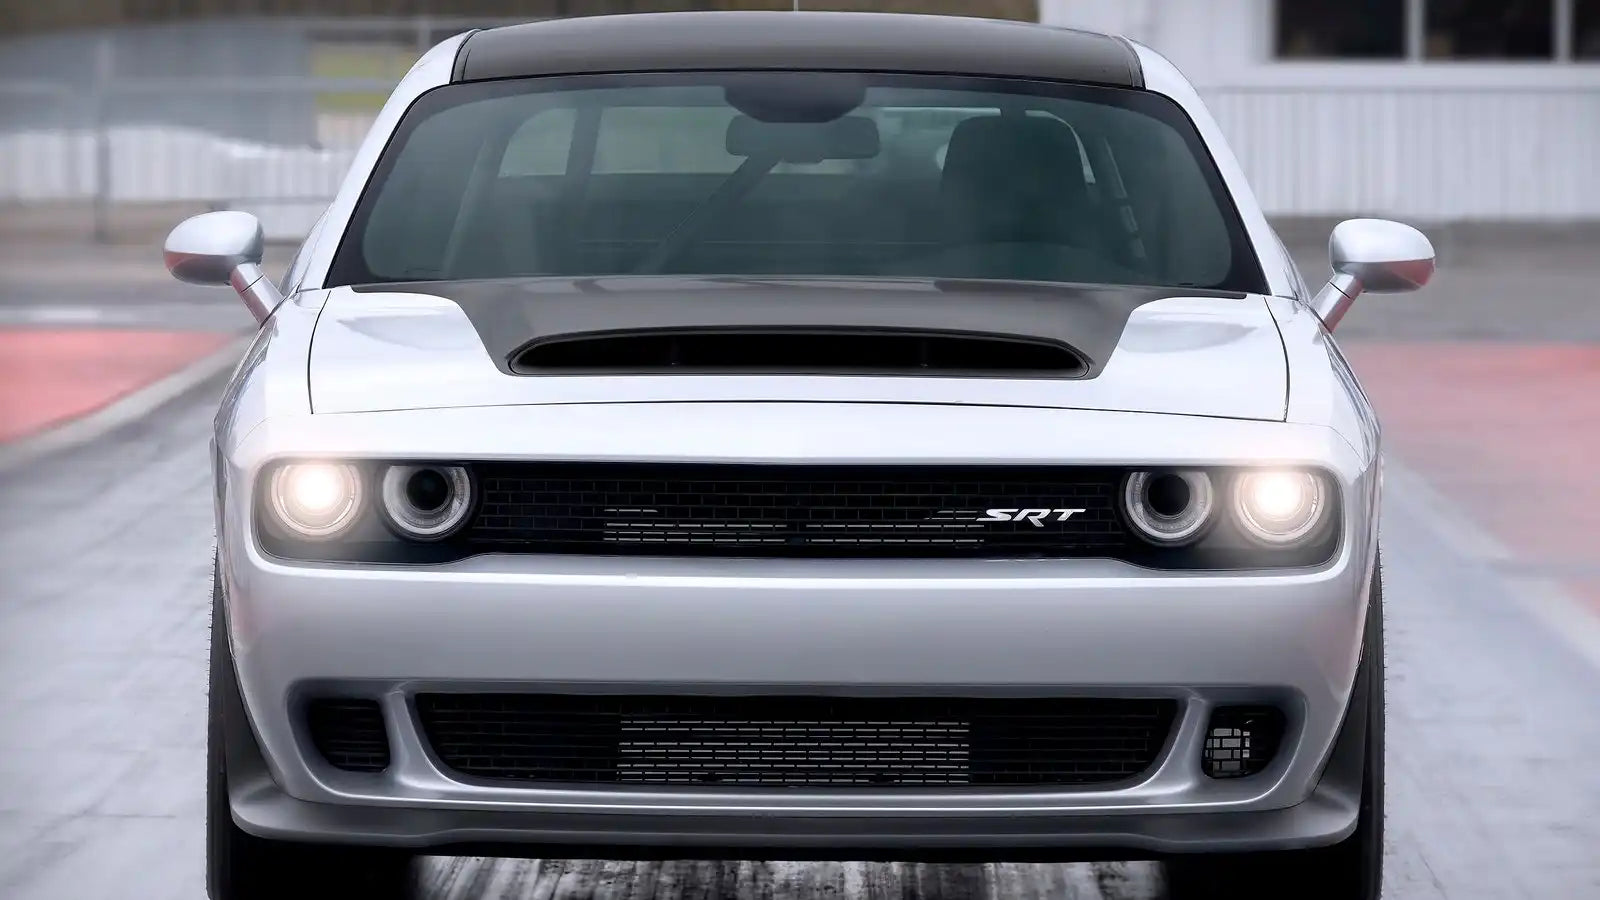 Frontal View Of the Dodge Challenger SRT Demon 170